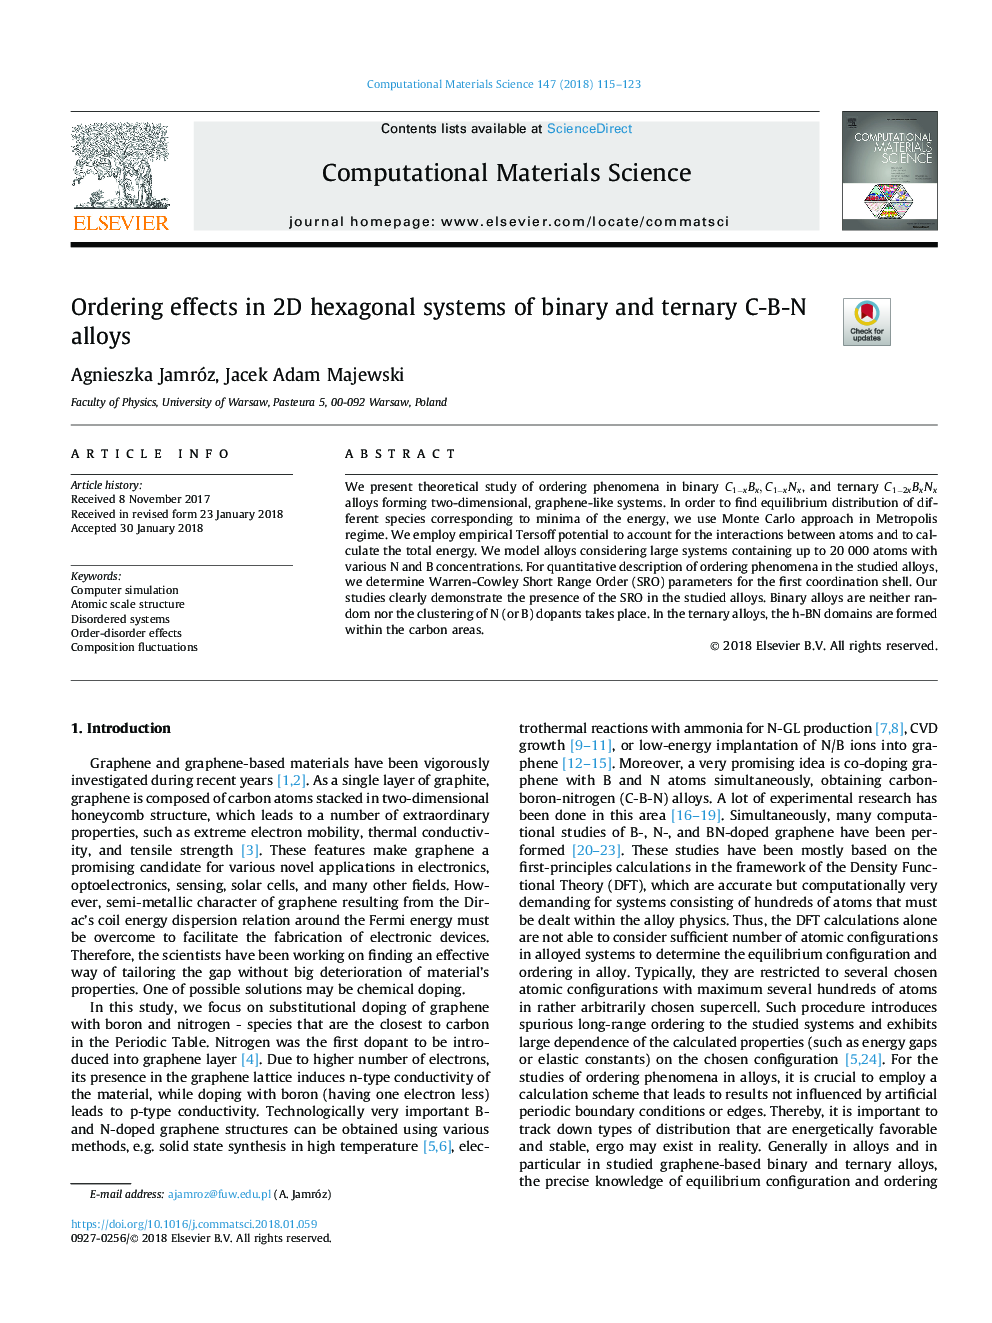 Ordering effects in 2D hexagonal systems of binary and ternary C-B-N alloys